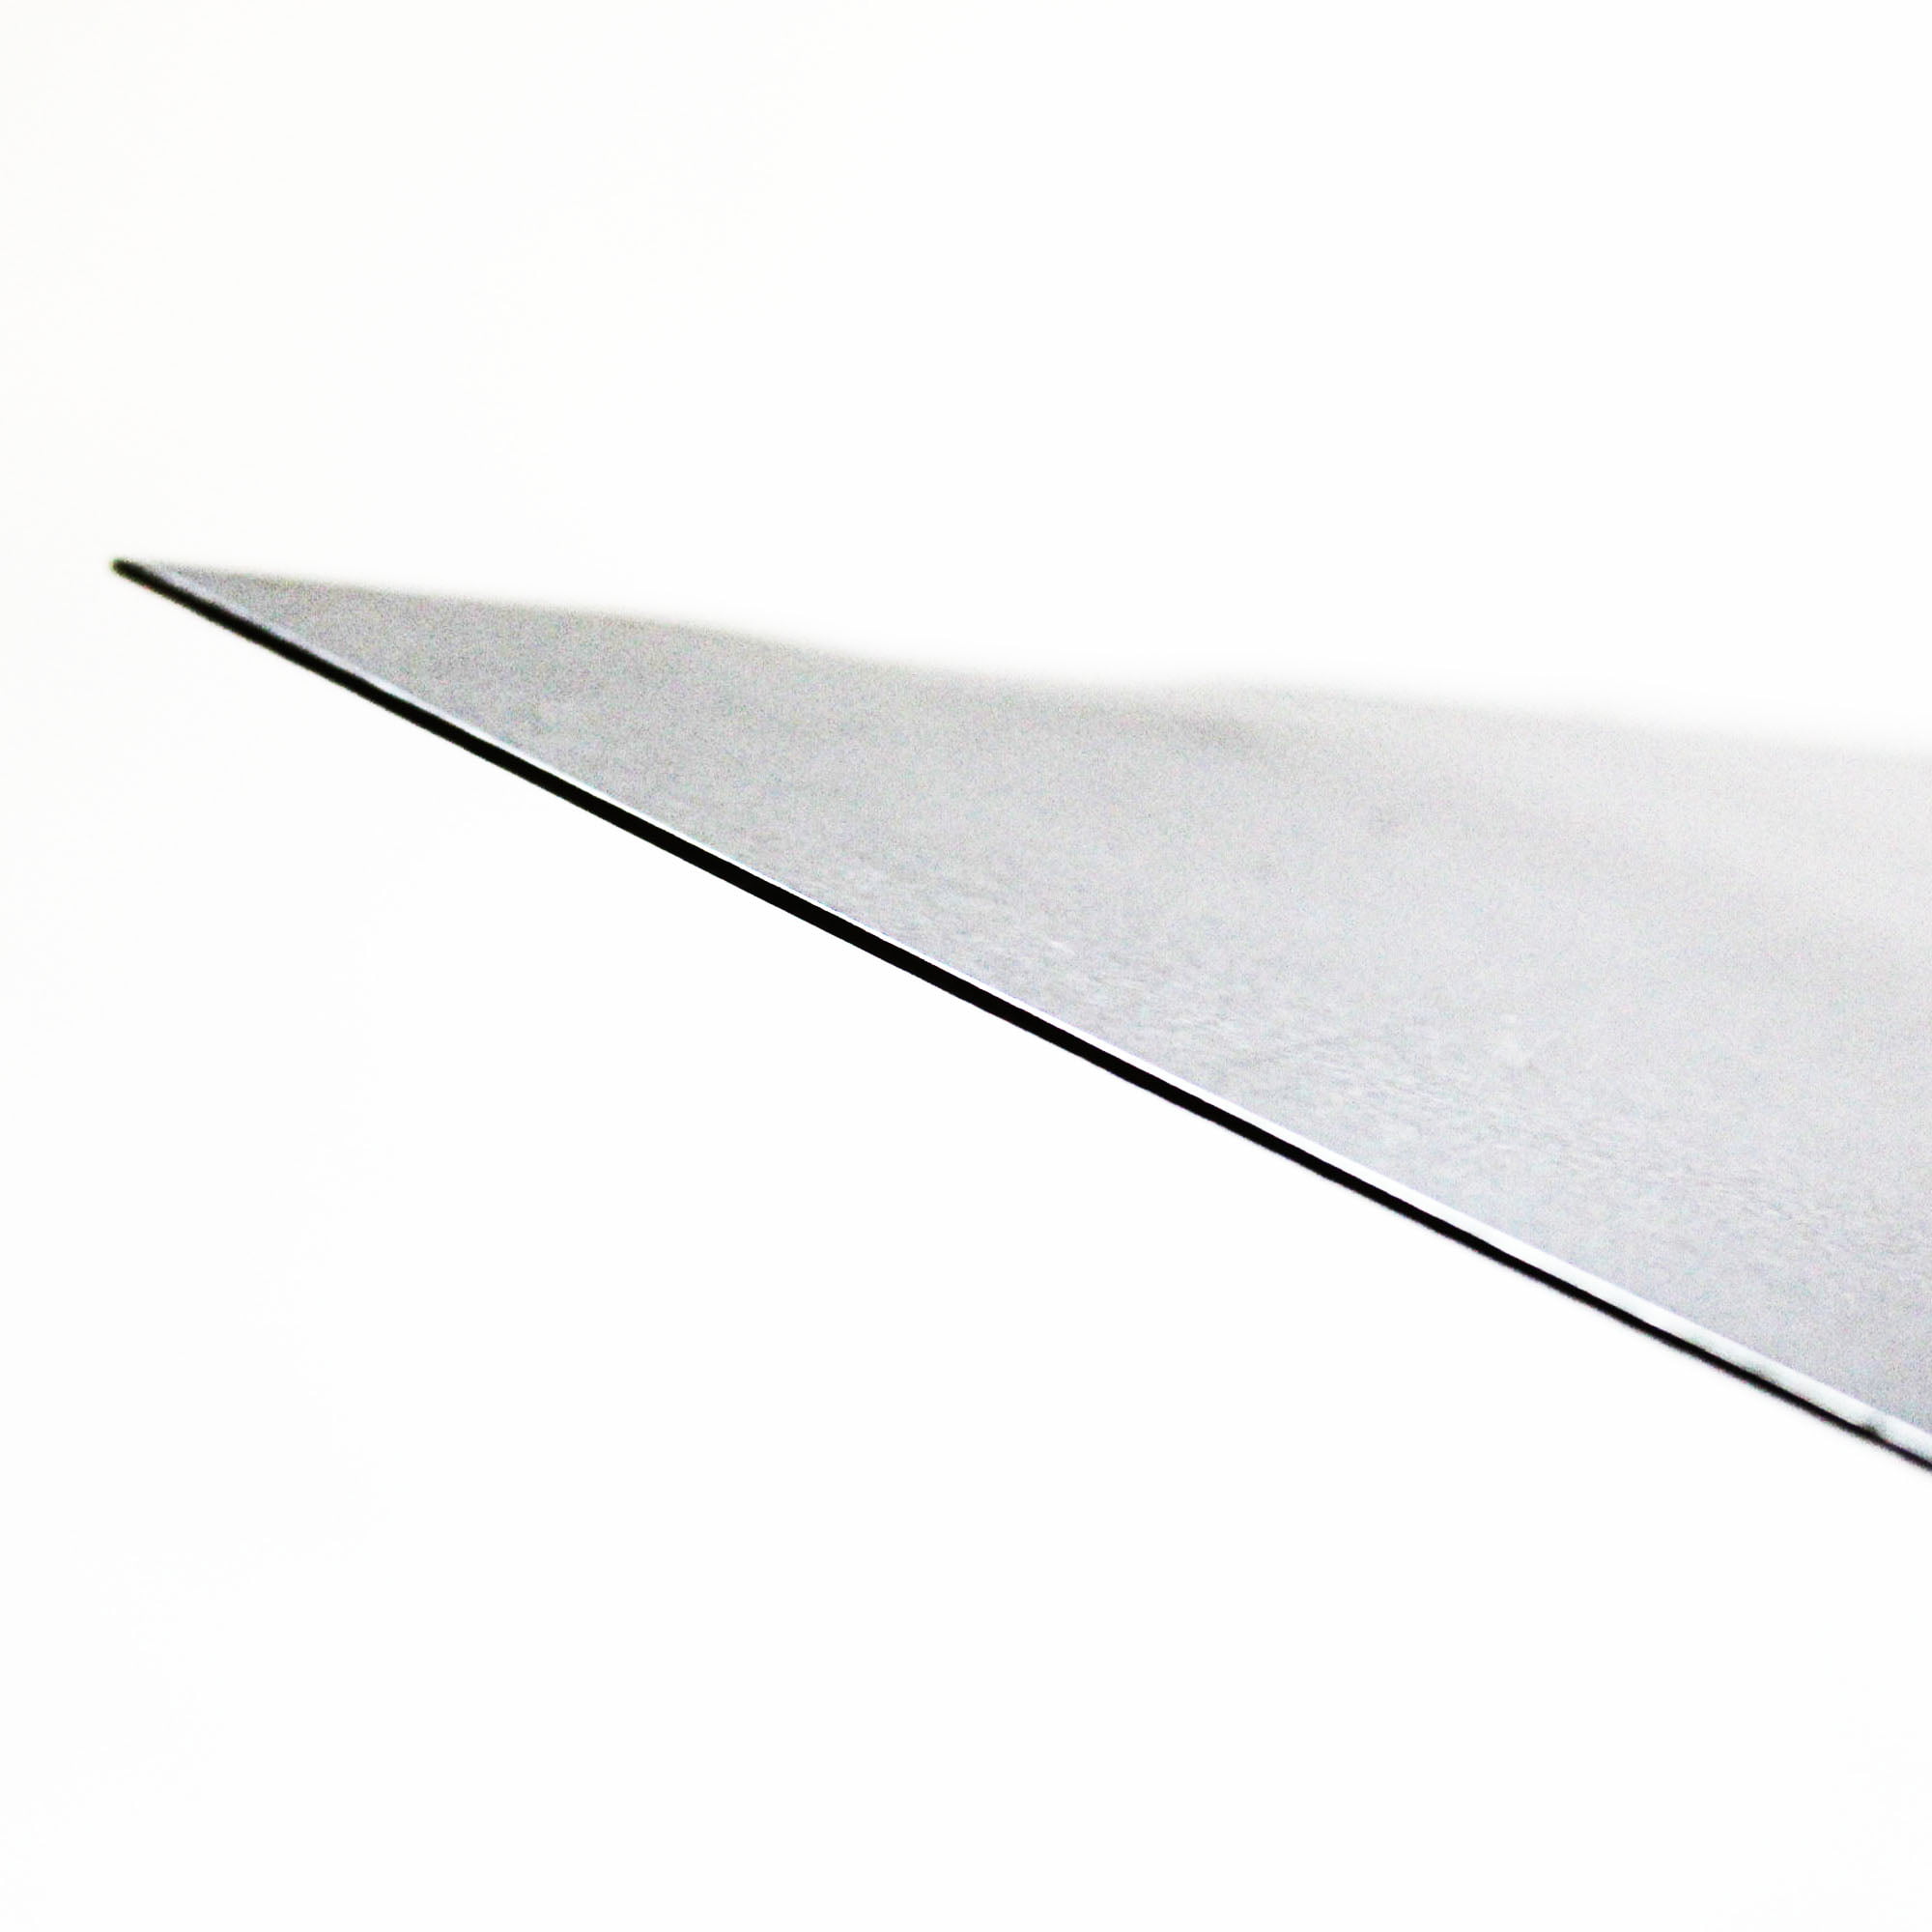 0.9mm Thick Mild Steel Metal Thin Sheet Plate - Speciality Metals